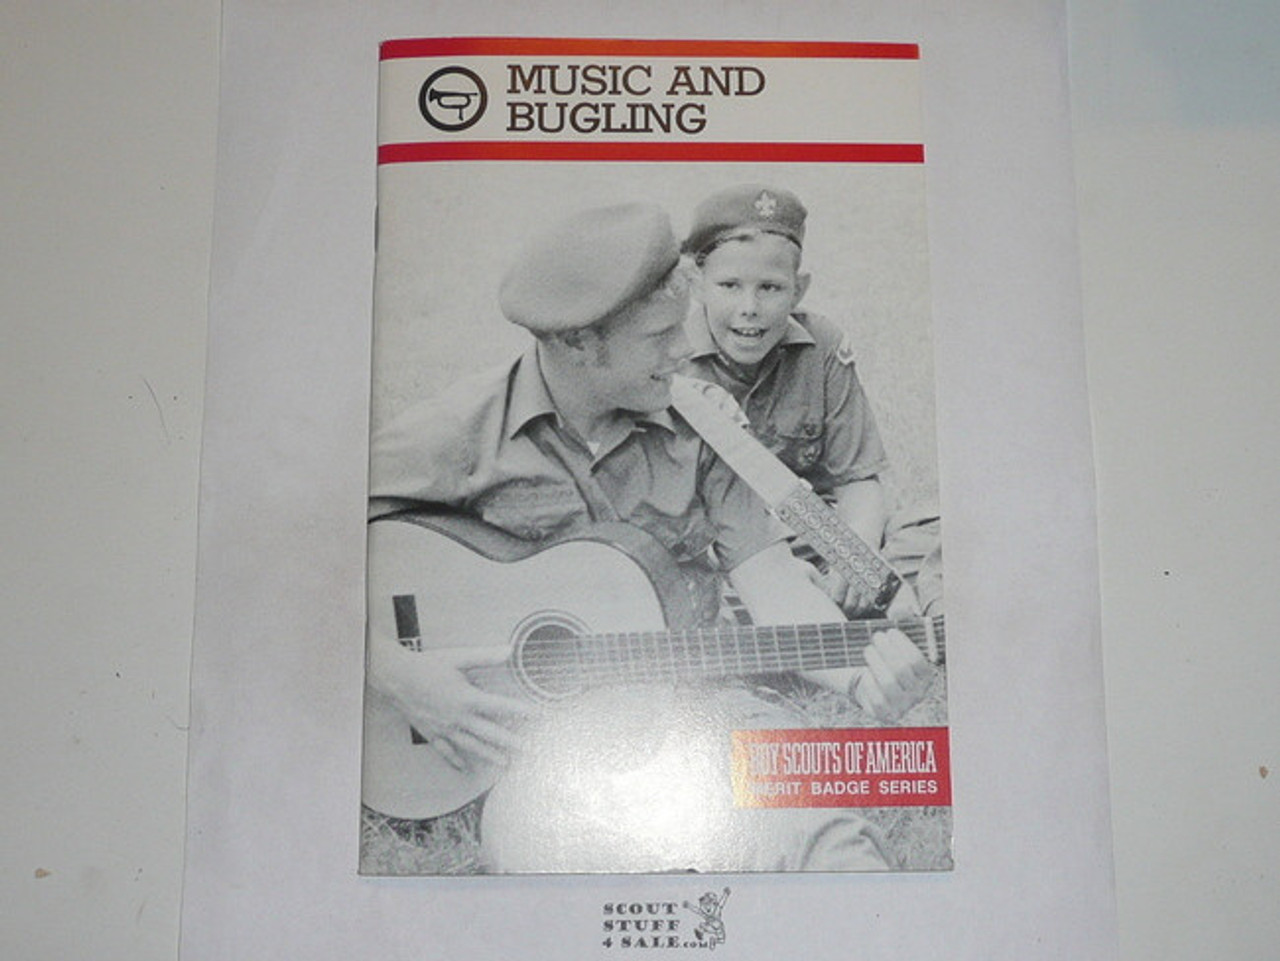 Music and Bugling Merit Badge Pamphlet, Type 9, Red Band Cover, 6-87 Printing